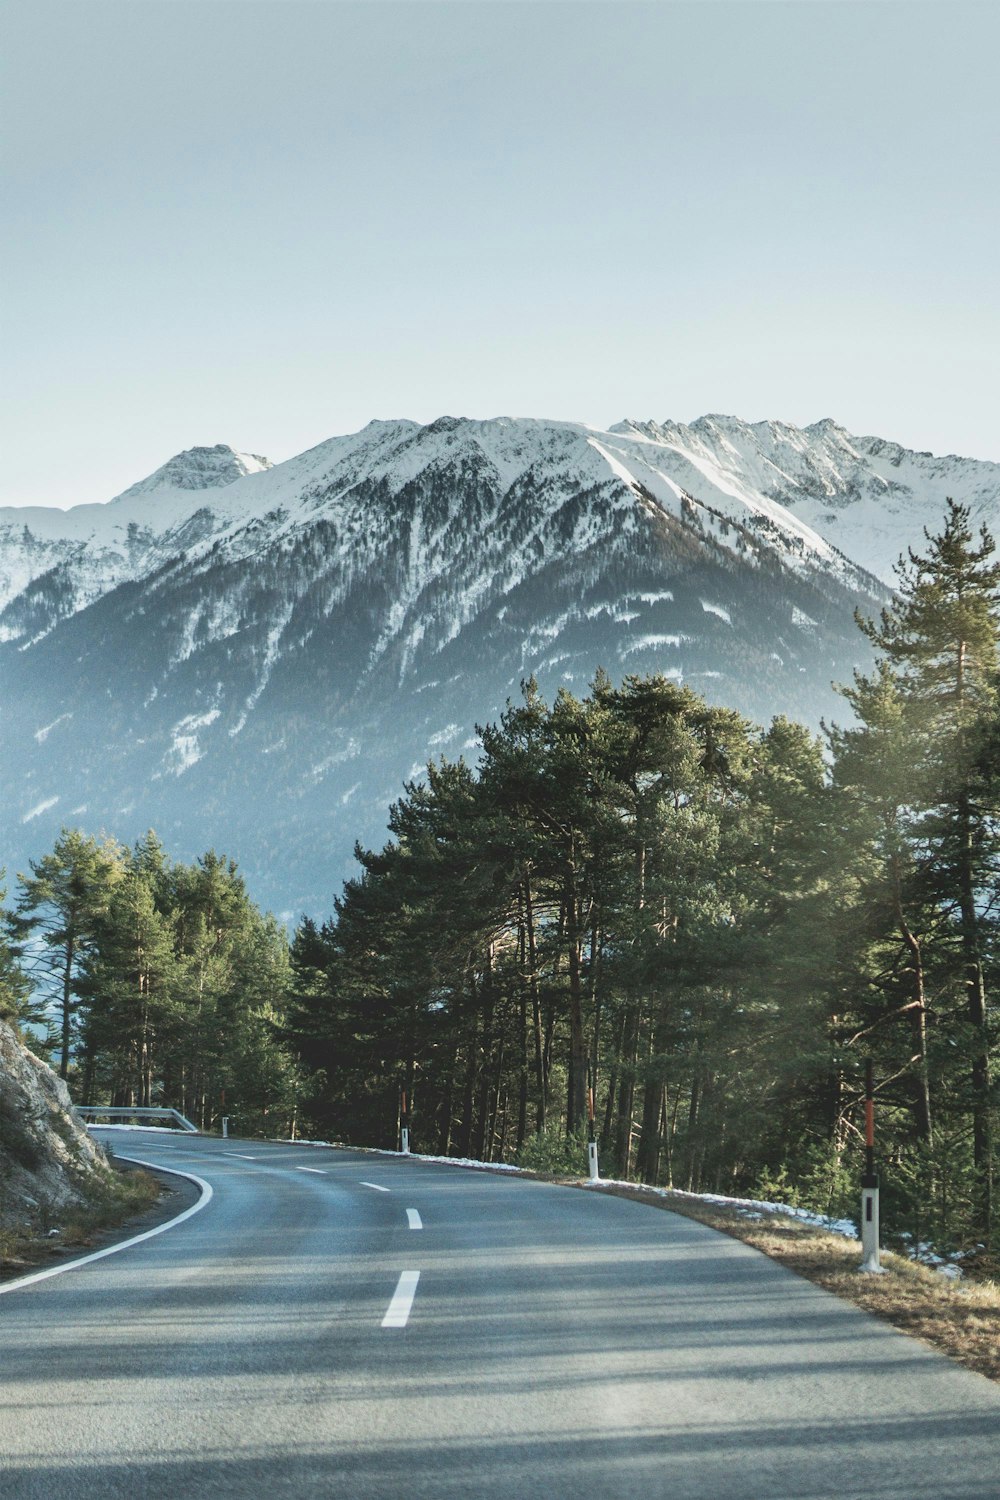 500+ Mountain Road Pictures [Stunning!] | Download Free Images on Unsplash